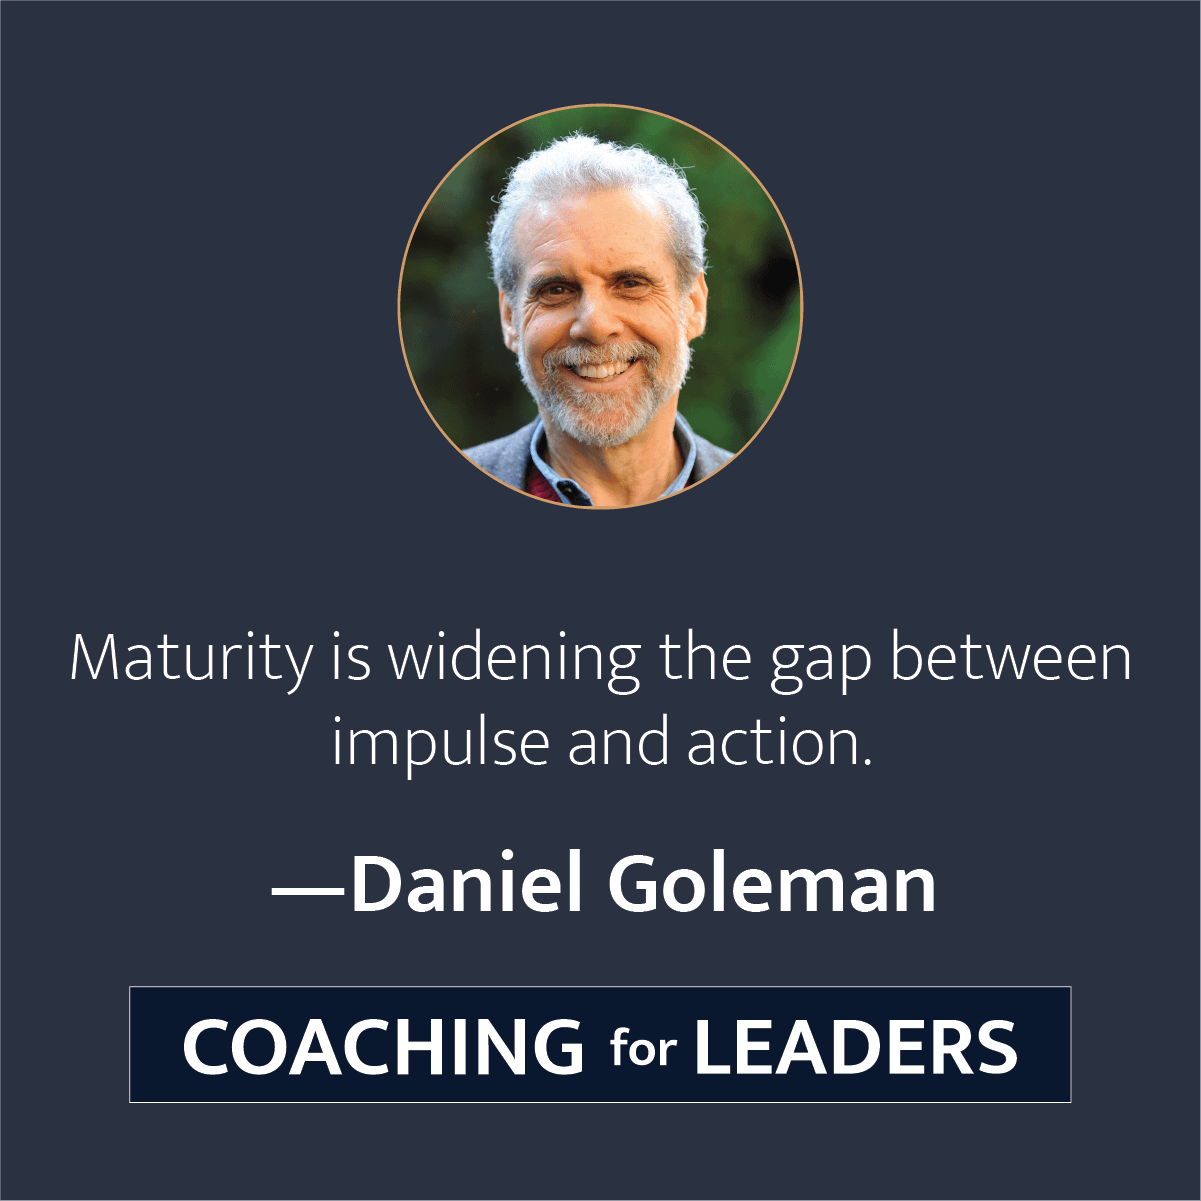 Maturity is widening the gap between impulse and action.